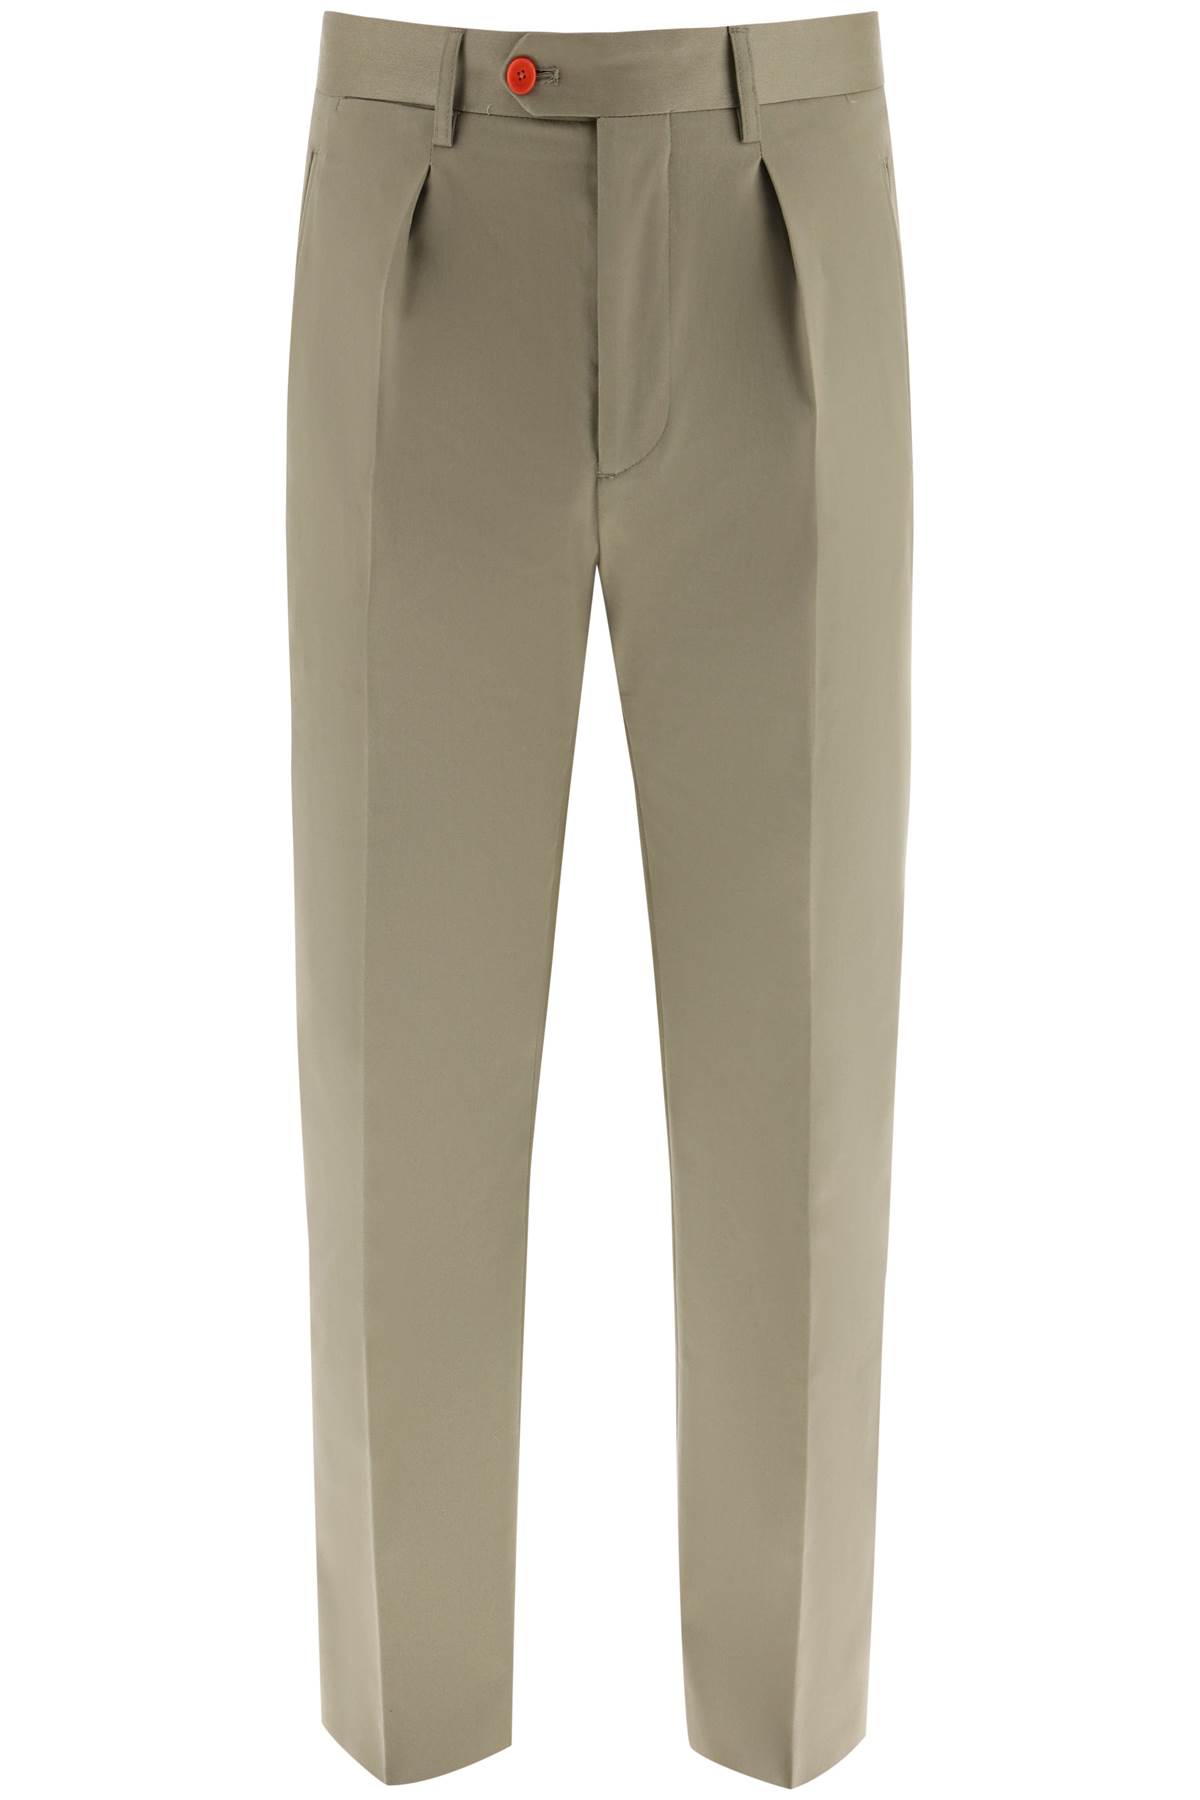 Etro Tailored Cotton Pants With Side Bands